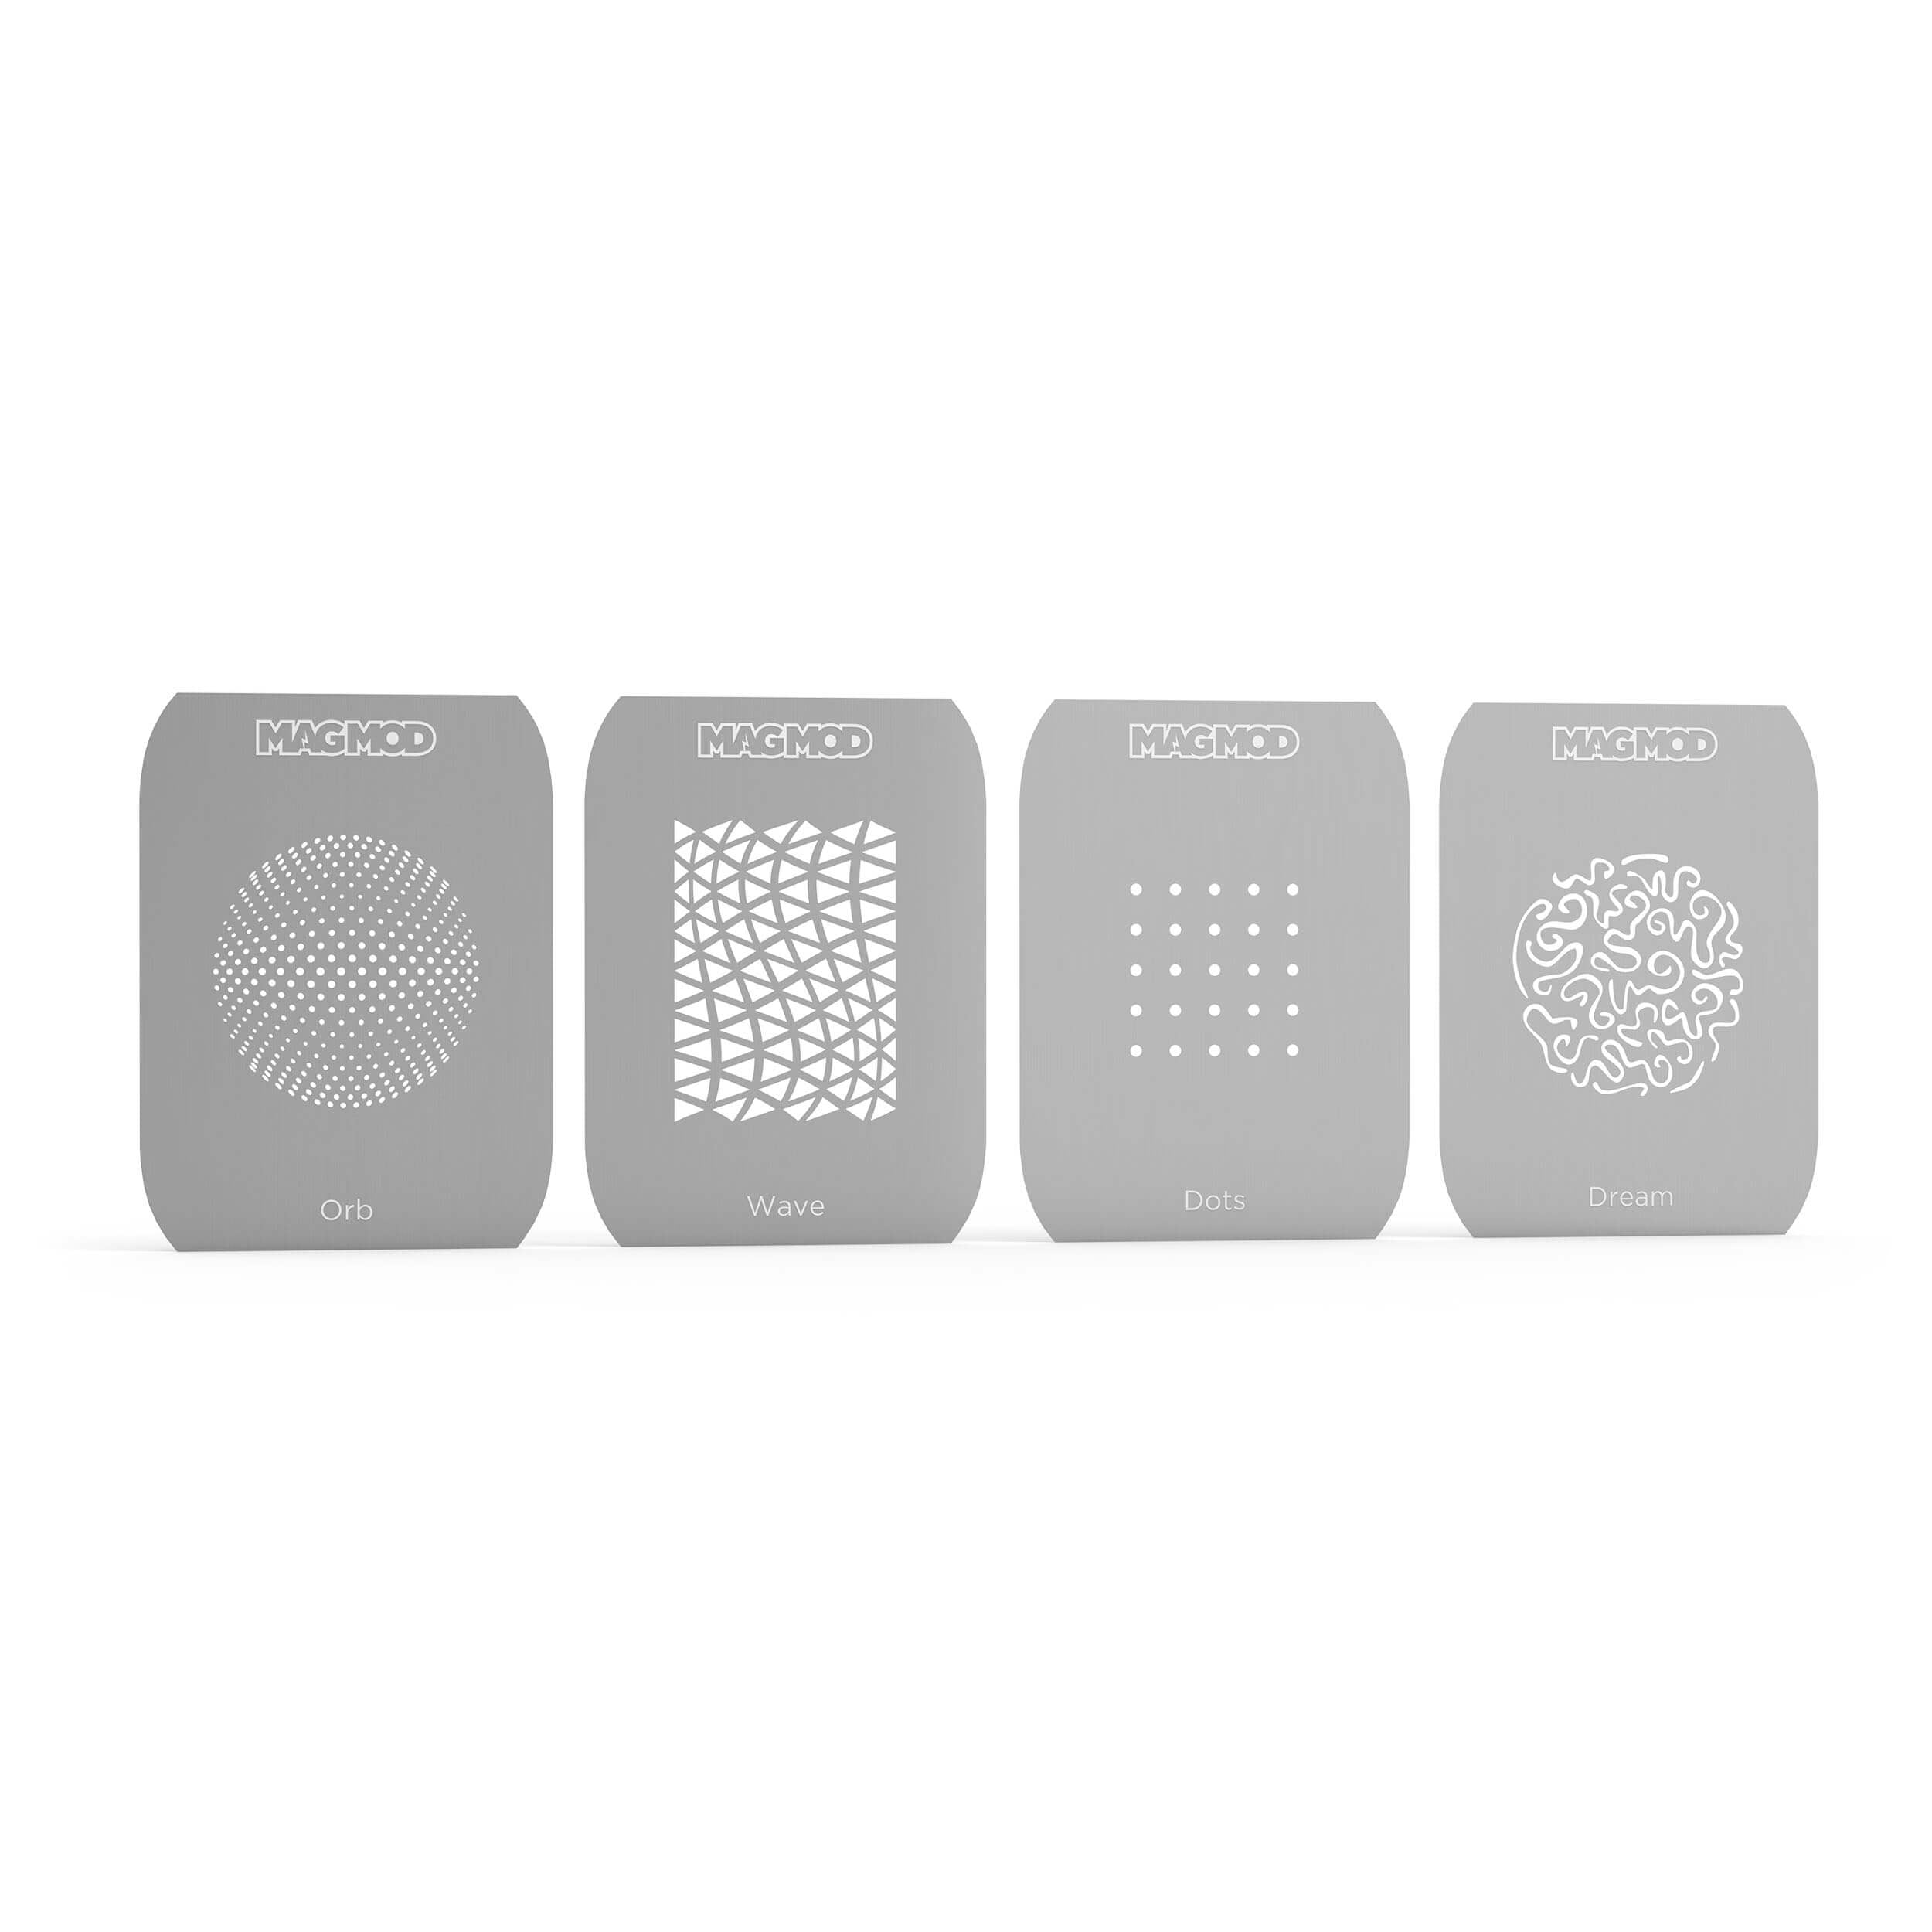 4 Different Gobos Graphic Plates For MagBeam (Pattern 1)